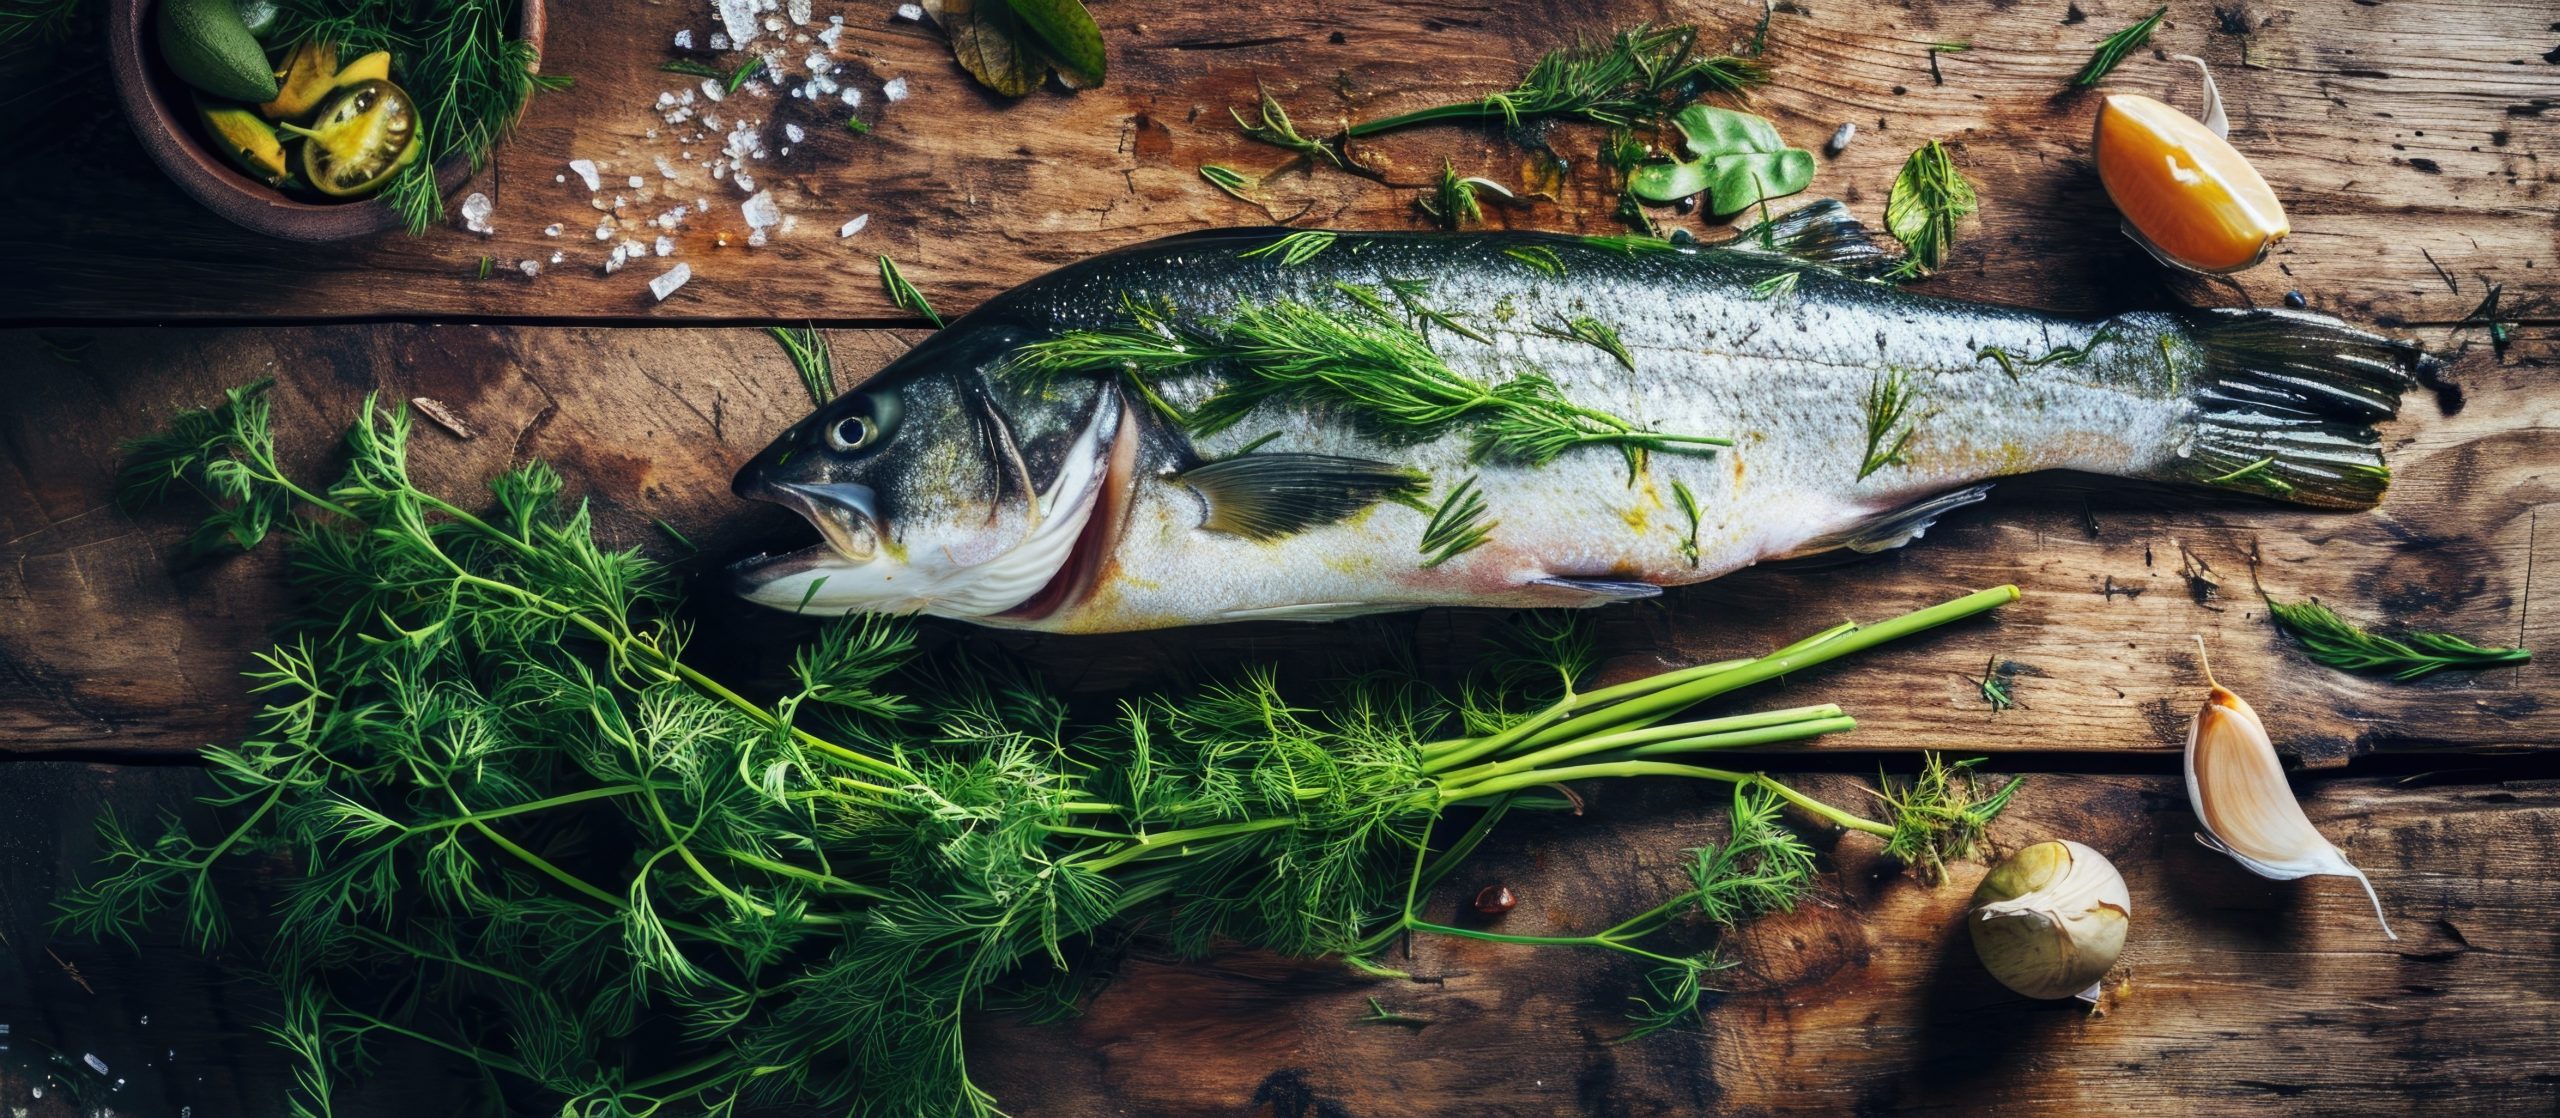 Sea bass with dill and laurel, rustic wood background.